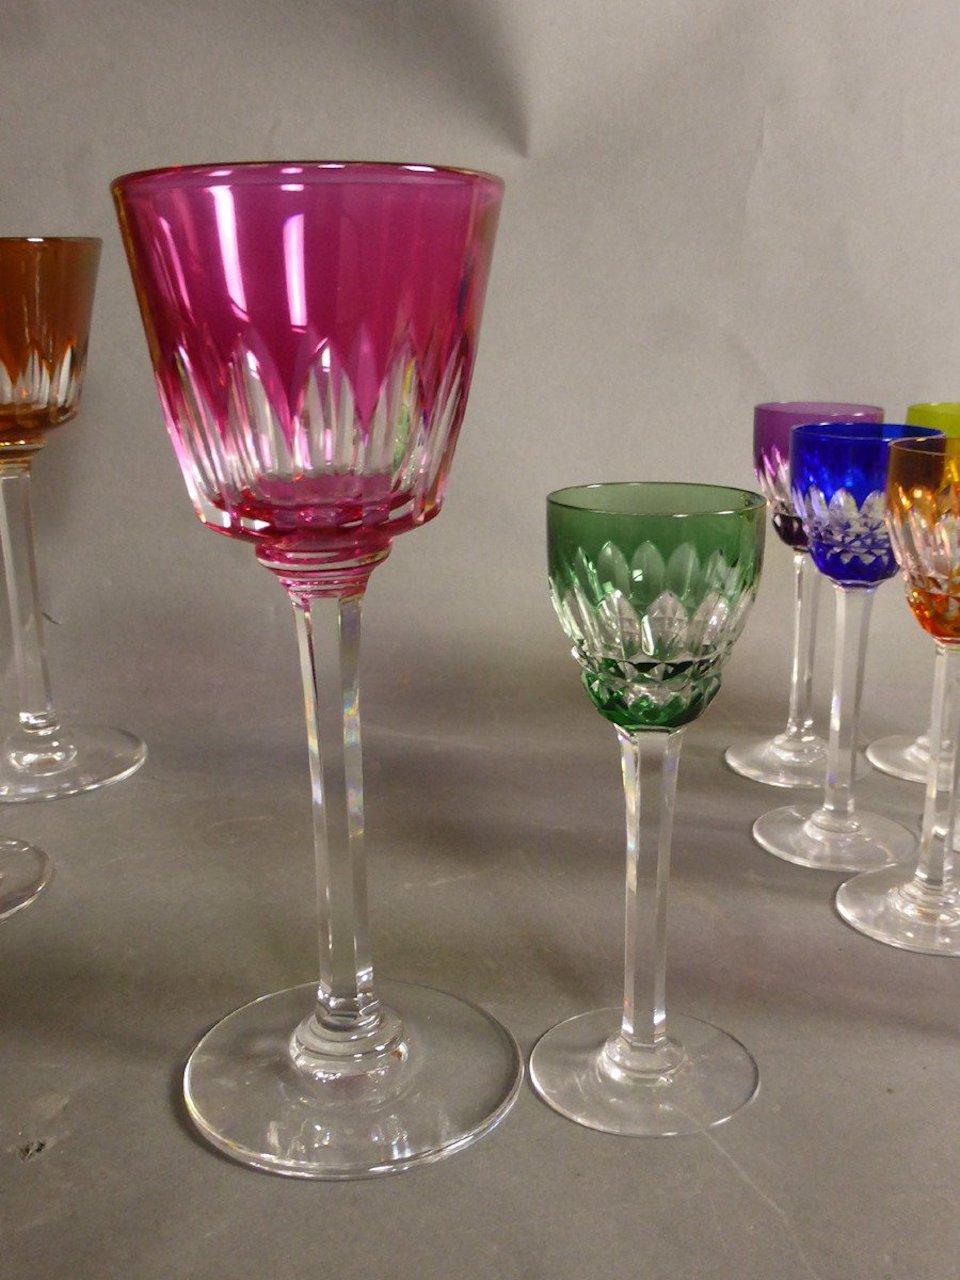 Set of 24 graven and colored crystal glasses from the famous French house Baccarat.
12 Wine glasses and 12 liqueur glasses. Each glass bears the stamp 